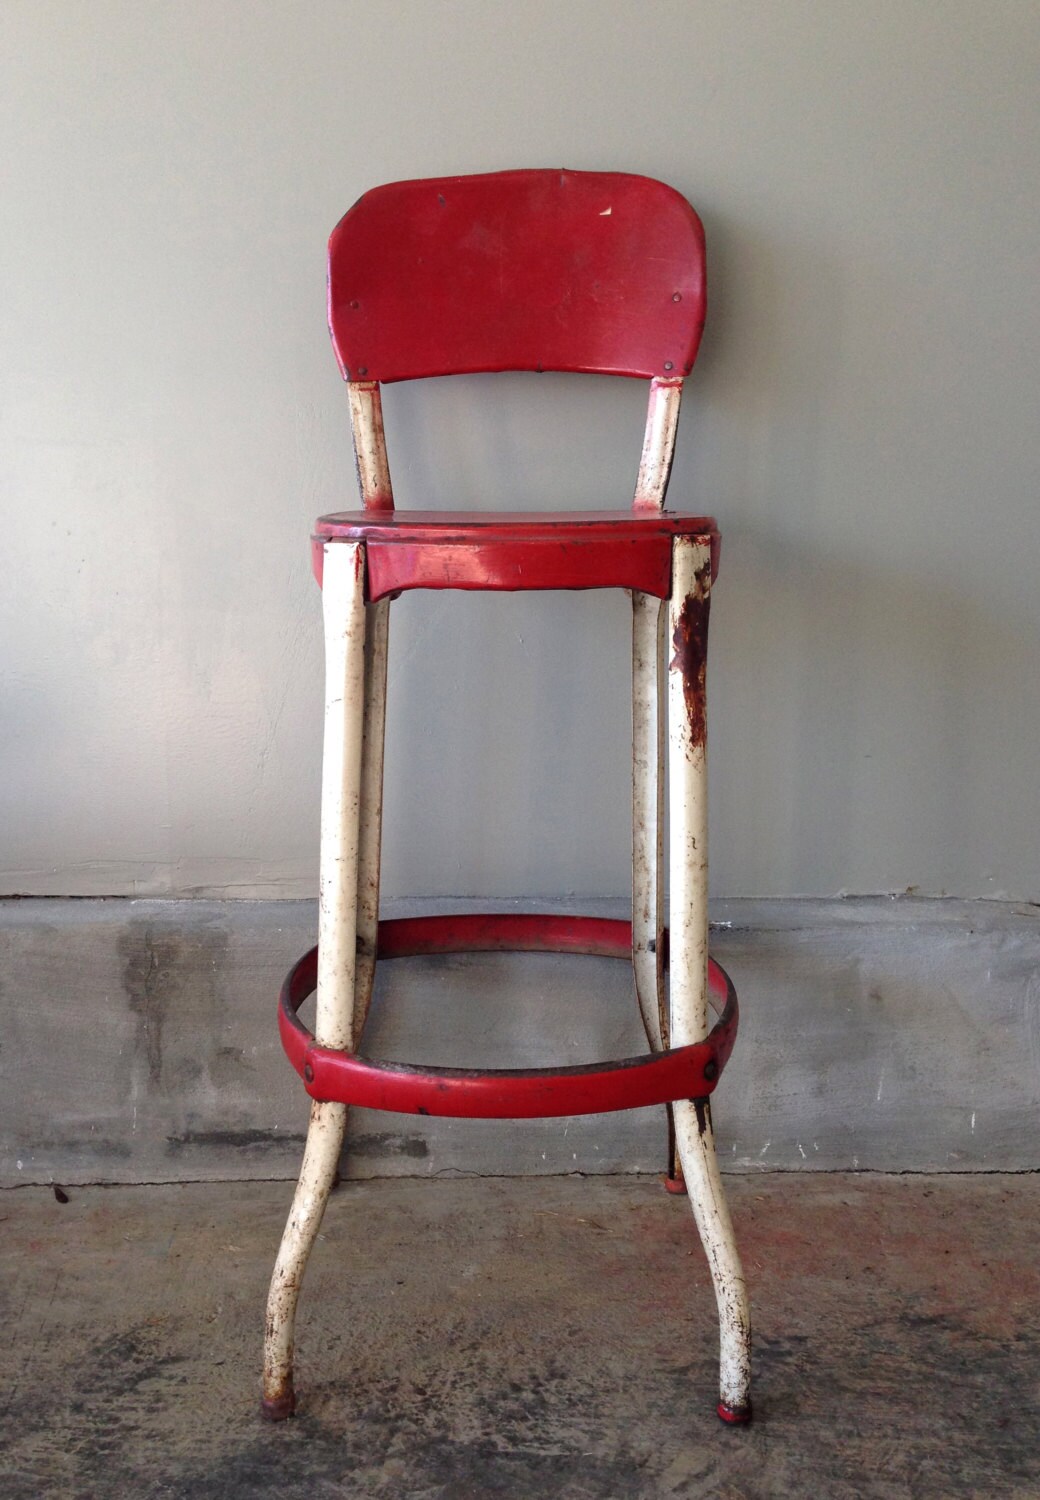 Rustic Antique Red Chair Costco Chair by HarpersFlea on Etsy